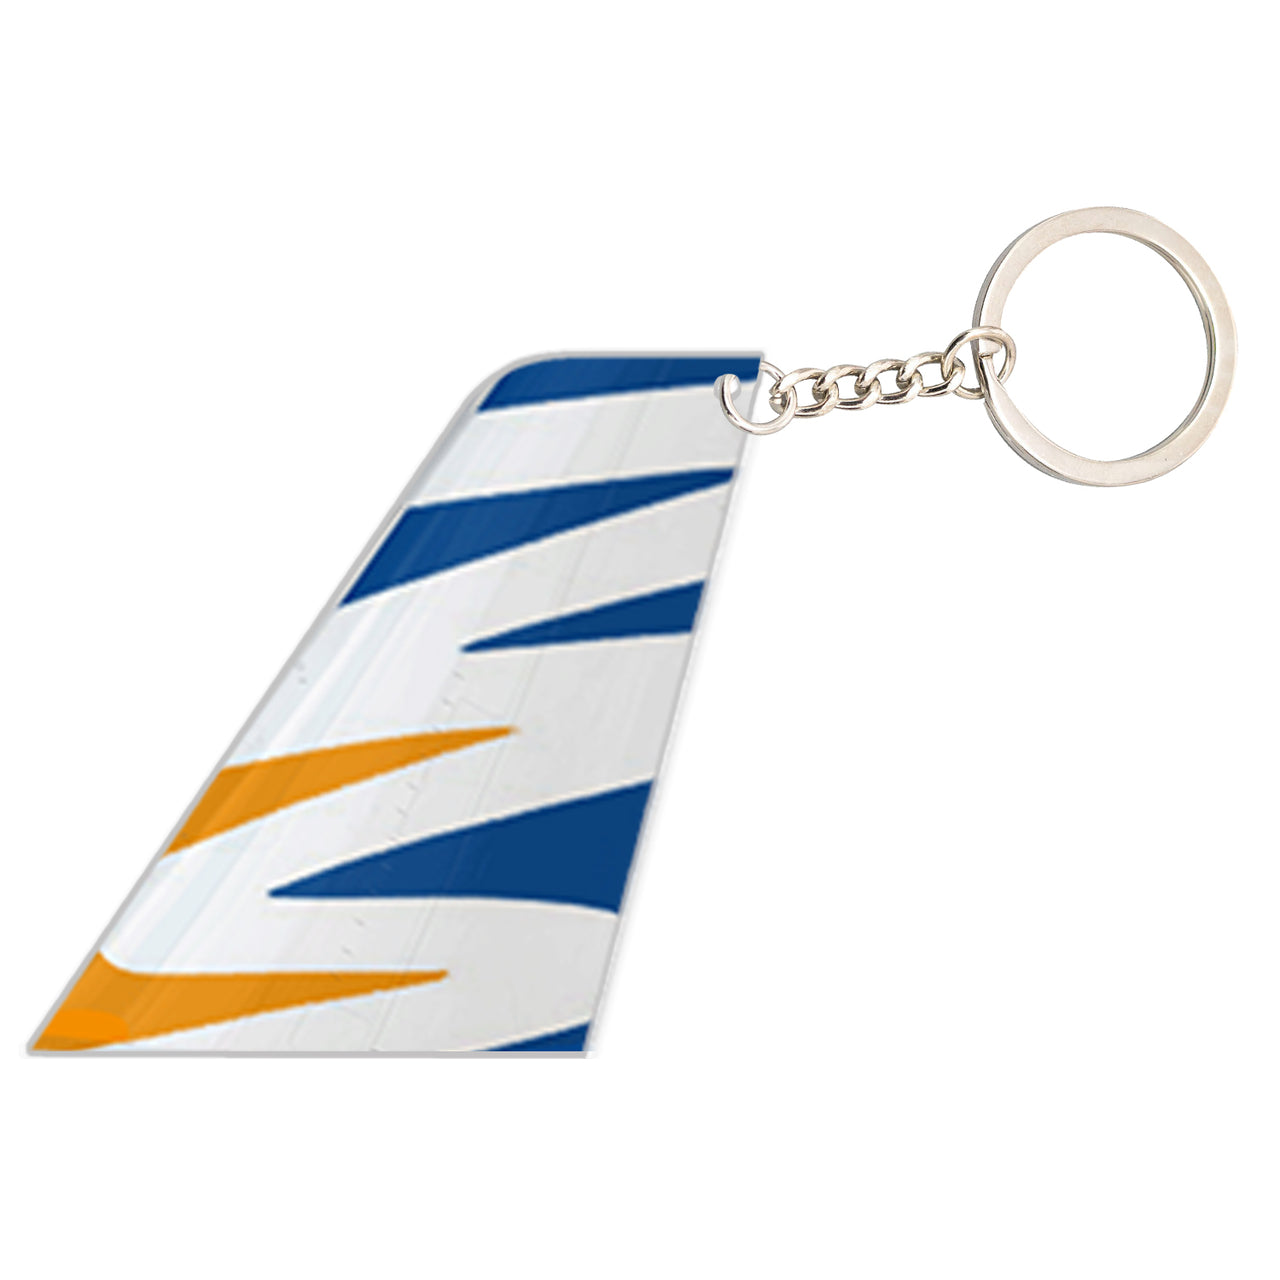 Smartwings Airlines Designed Tail Key Chains